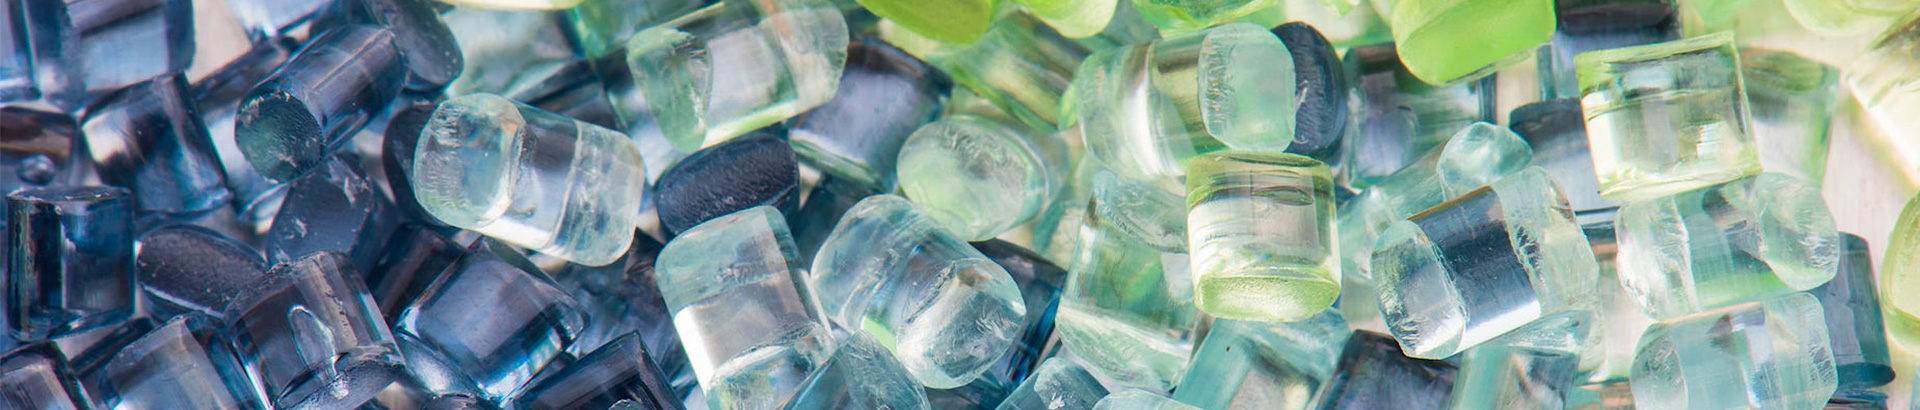 Medical Plastics Provide Innovation and Breakthroughs for the Medical Device Industry